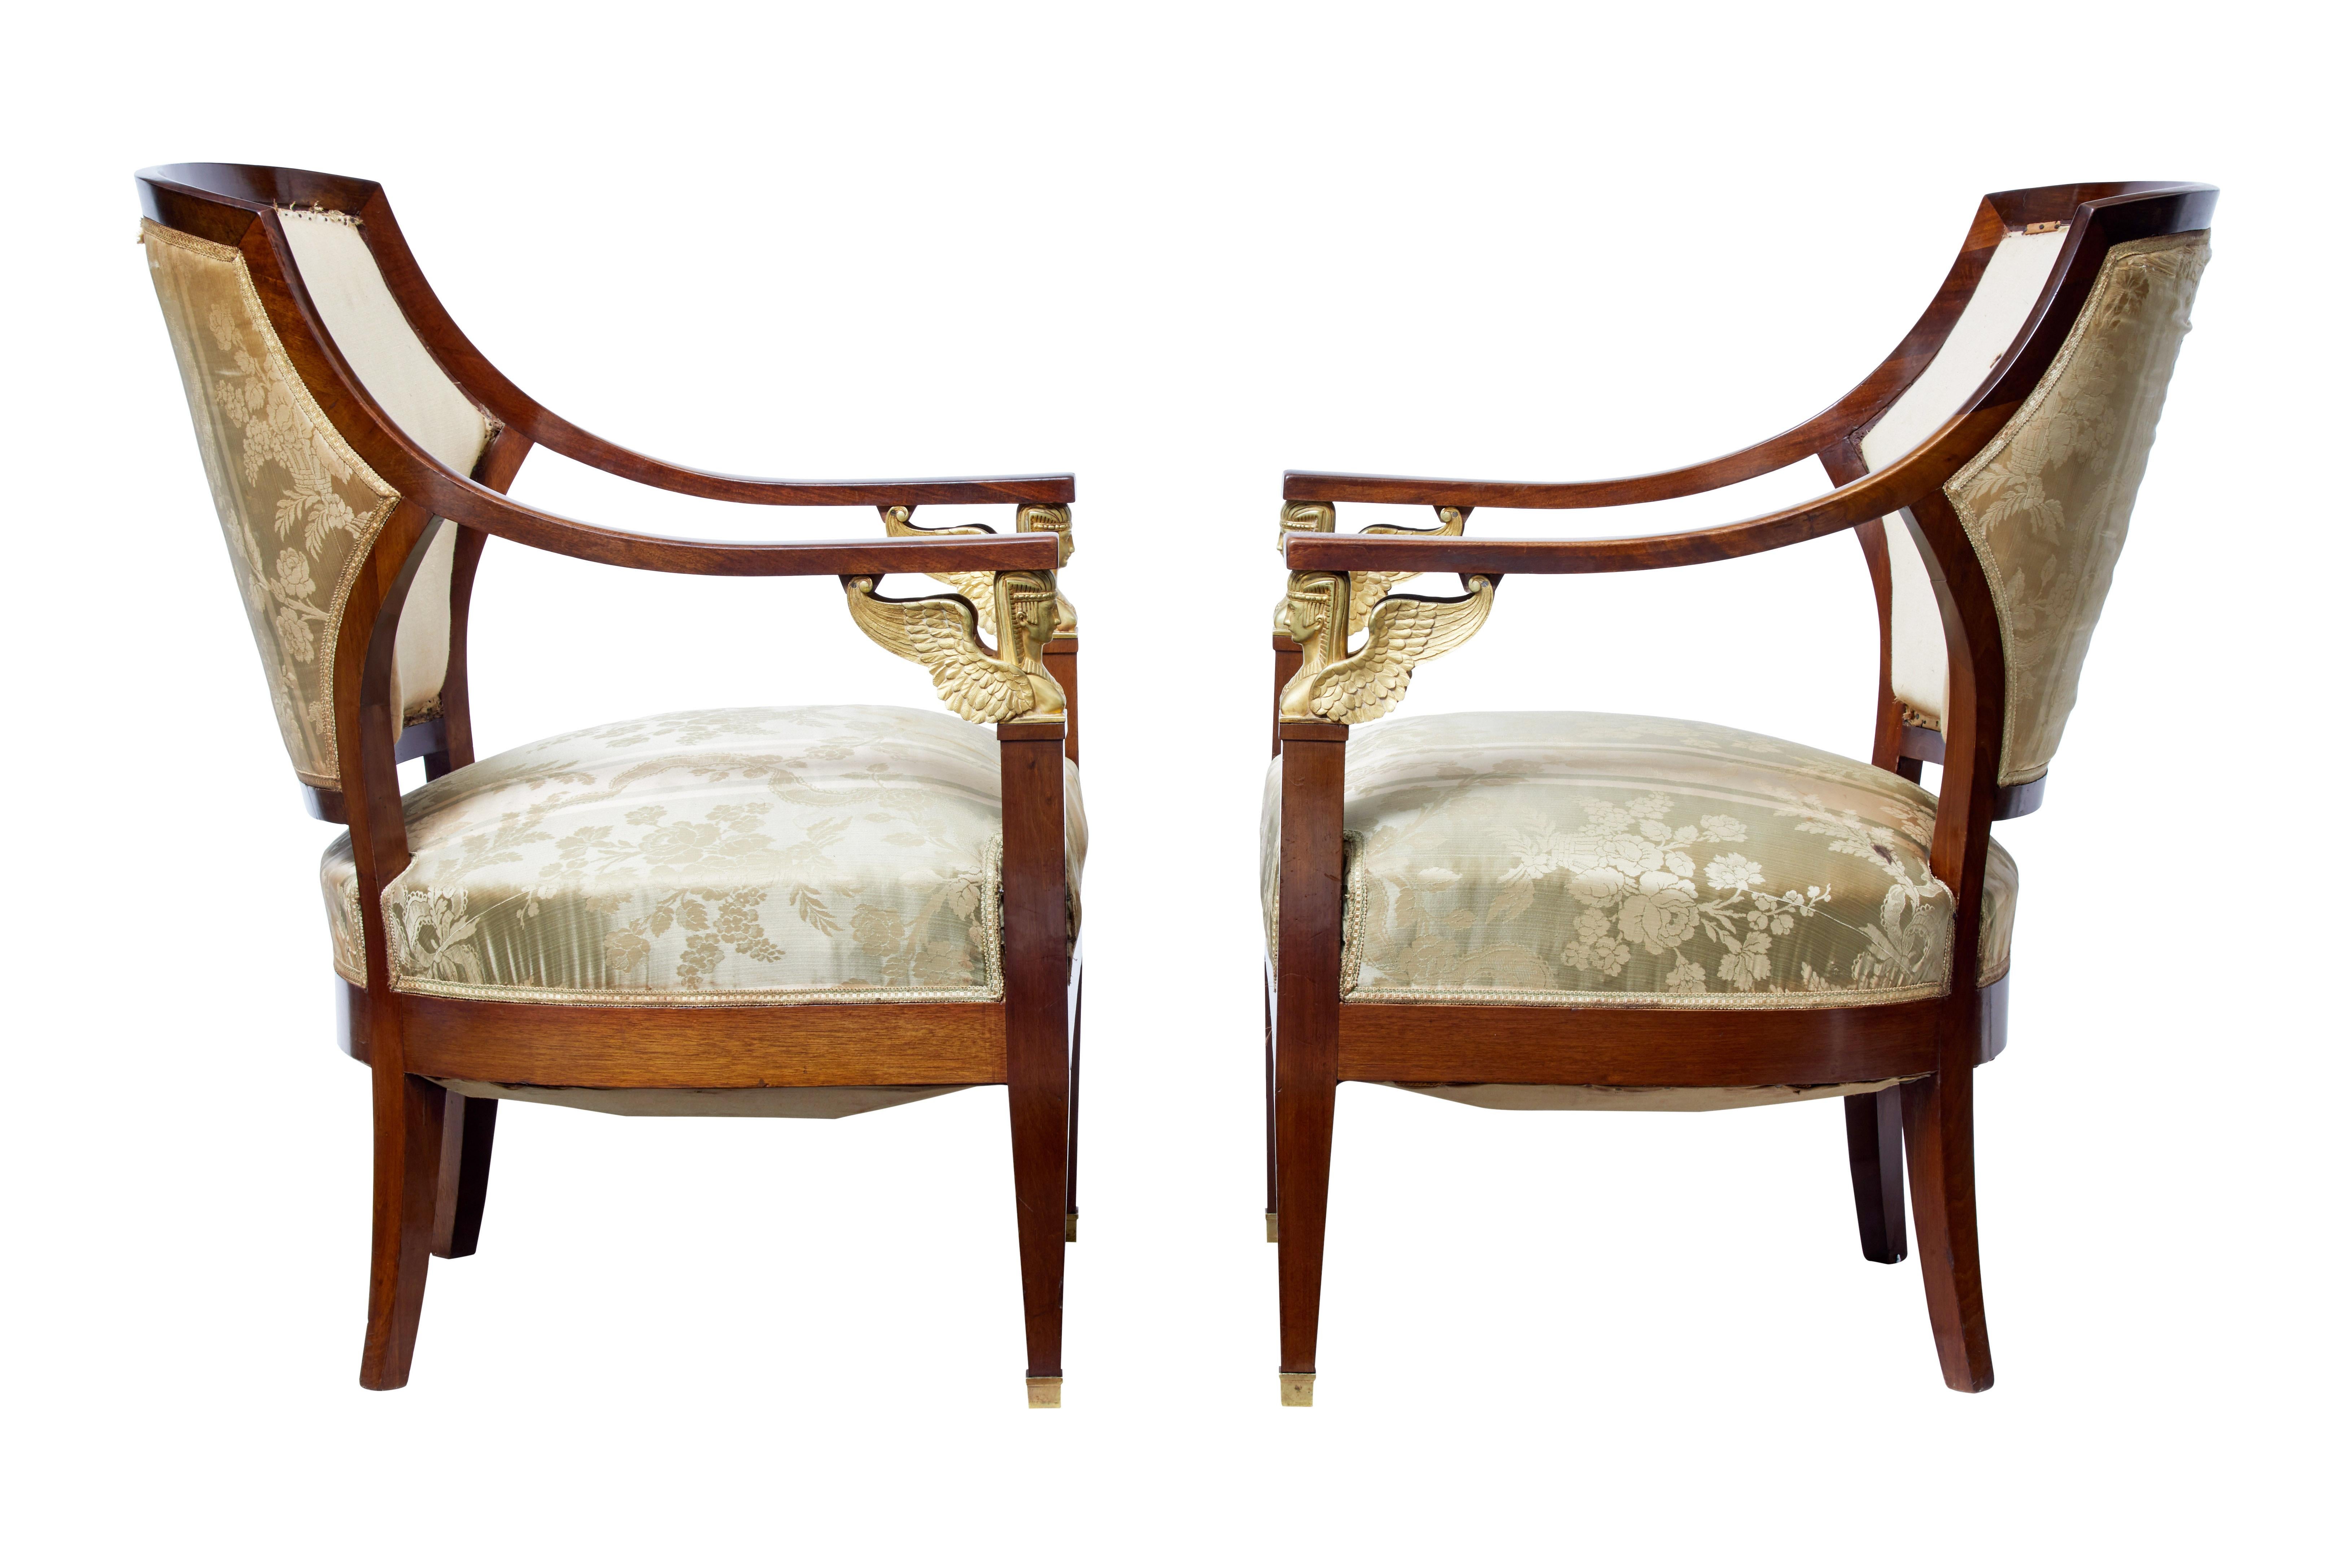 Woodwork Fine Pair of Late 19th Century Empire Mahogany Armchairs